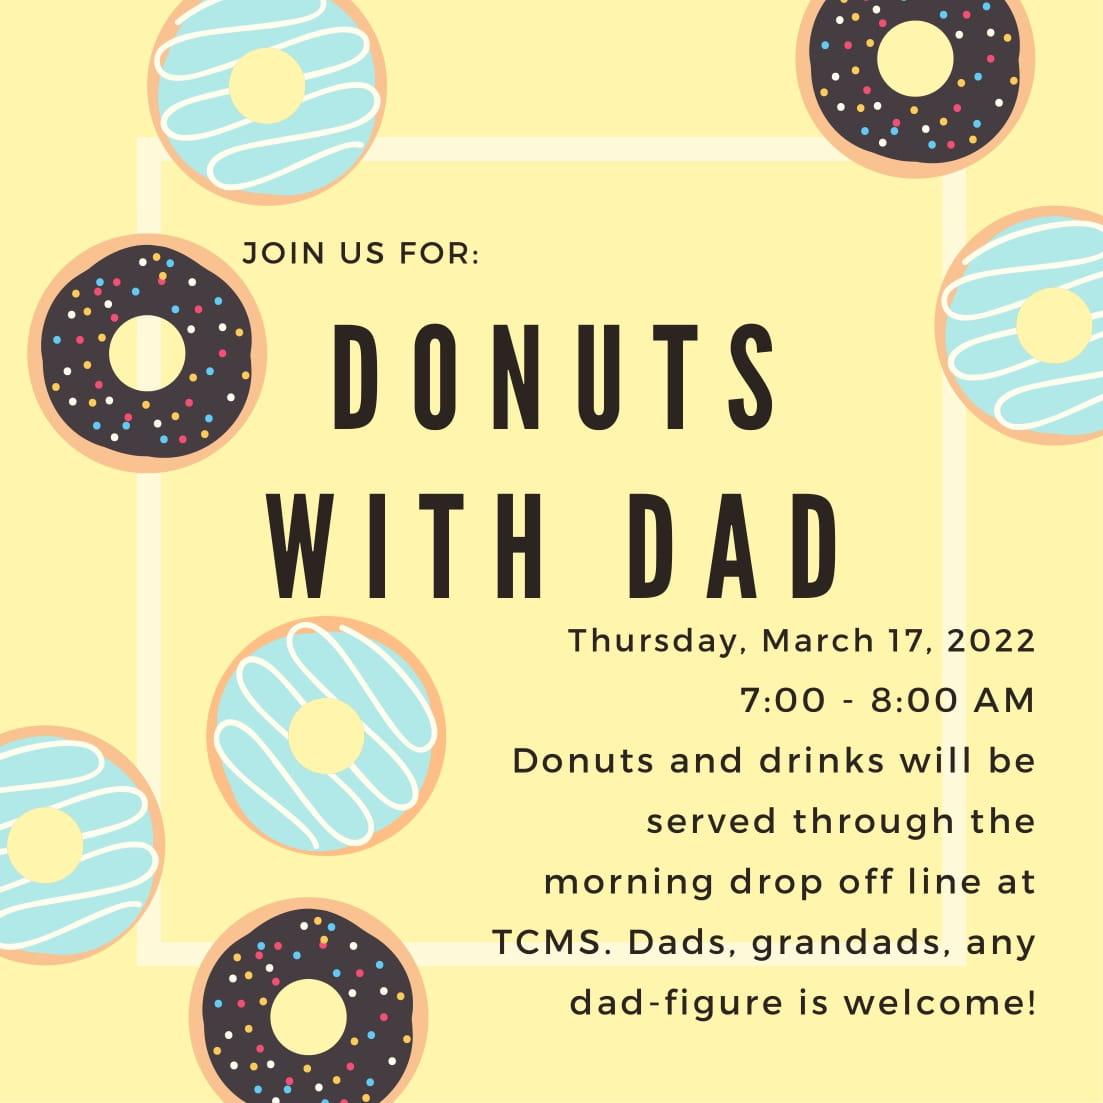 Donuts with Dad at TCMS